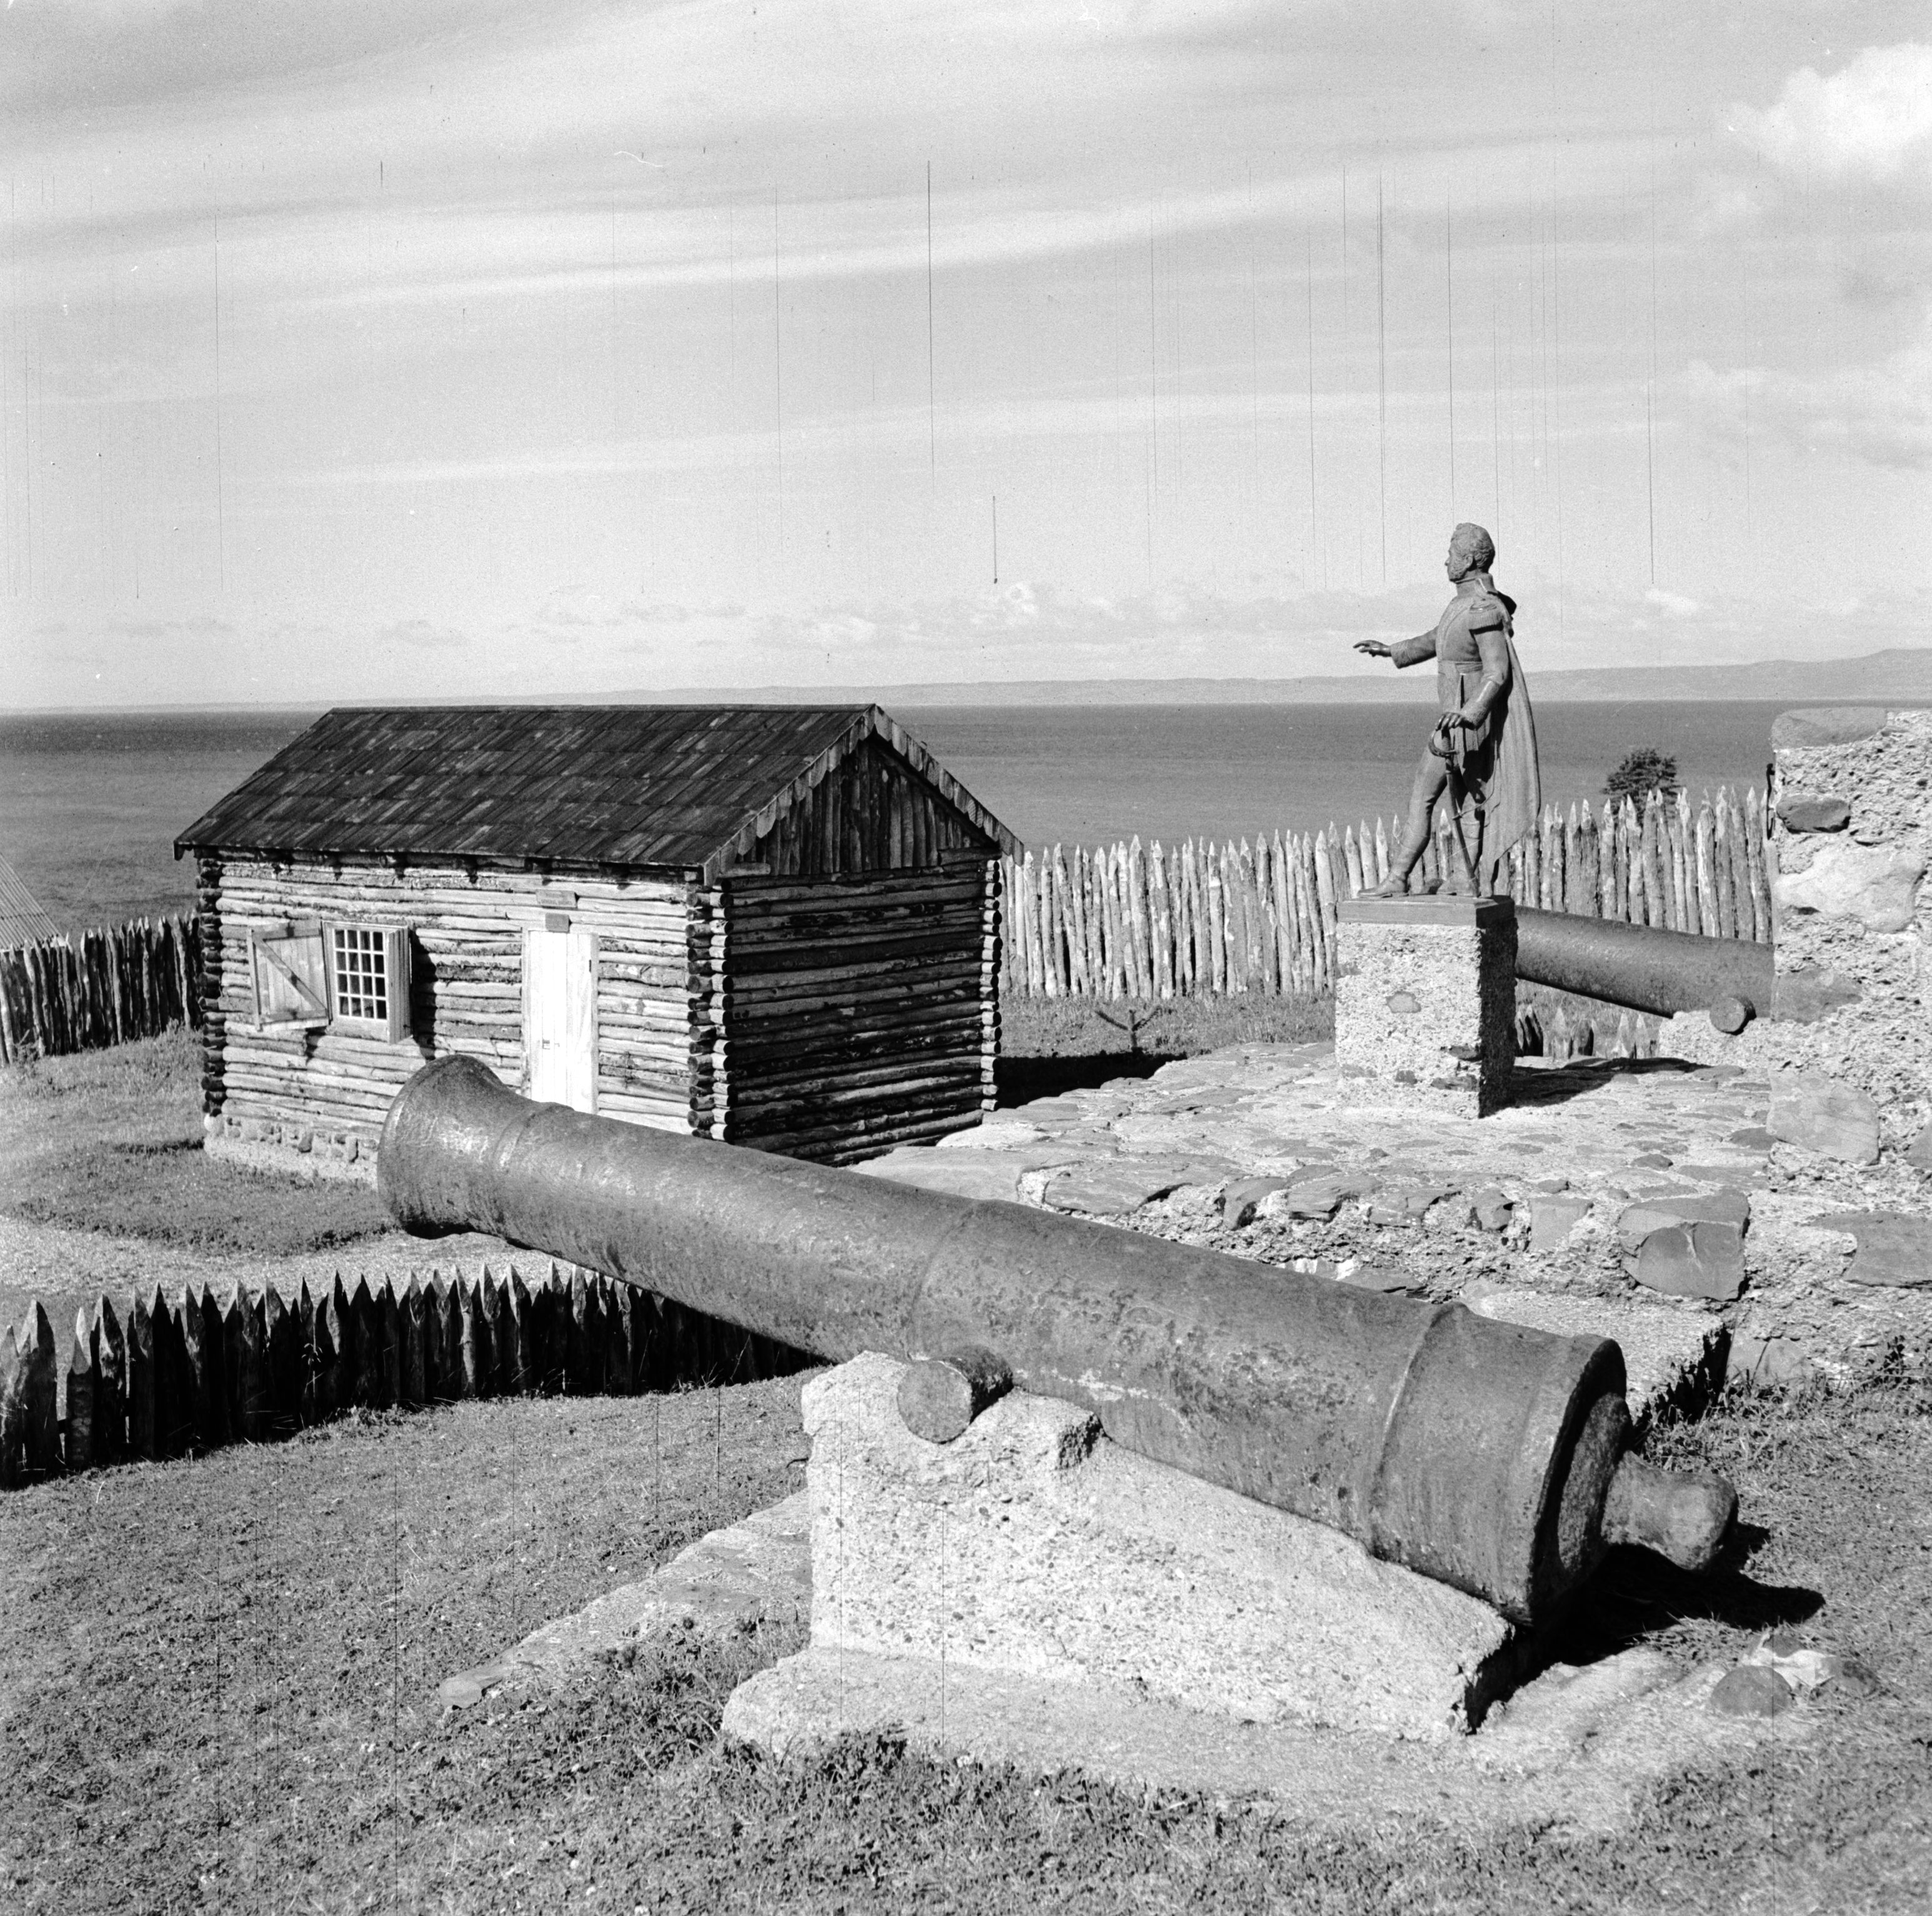 circa 1955: The fort of Fuerte Bulnes at the southern tip of the American continent. The statue of Manuel Bulnes, General of the Wars of Liberation and President of Chile in 1841, stands beside old cannons at the fort.